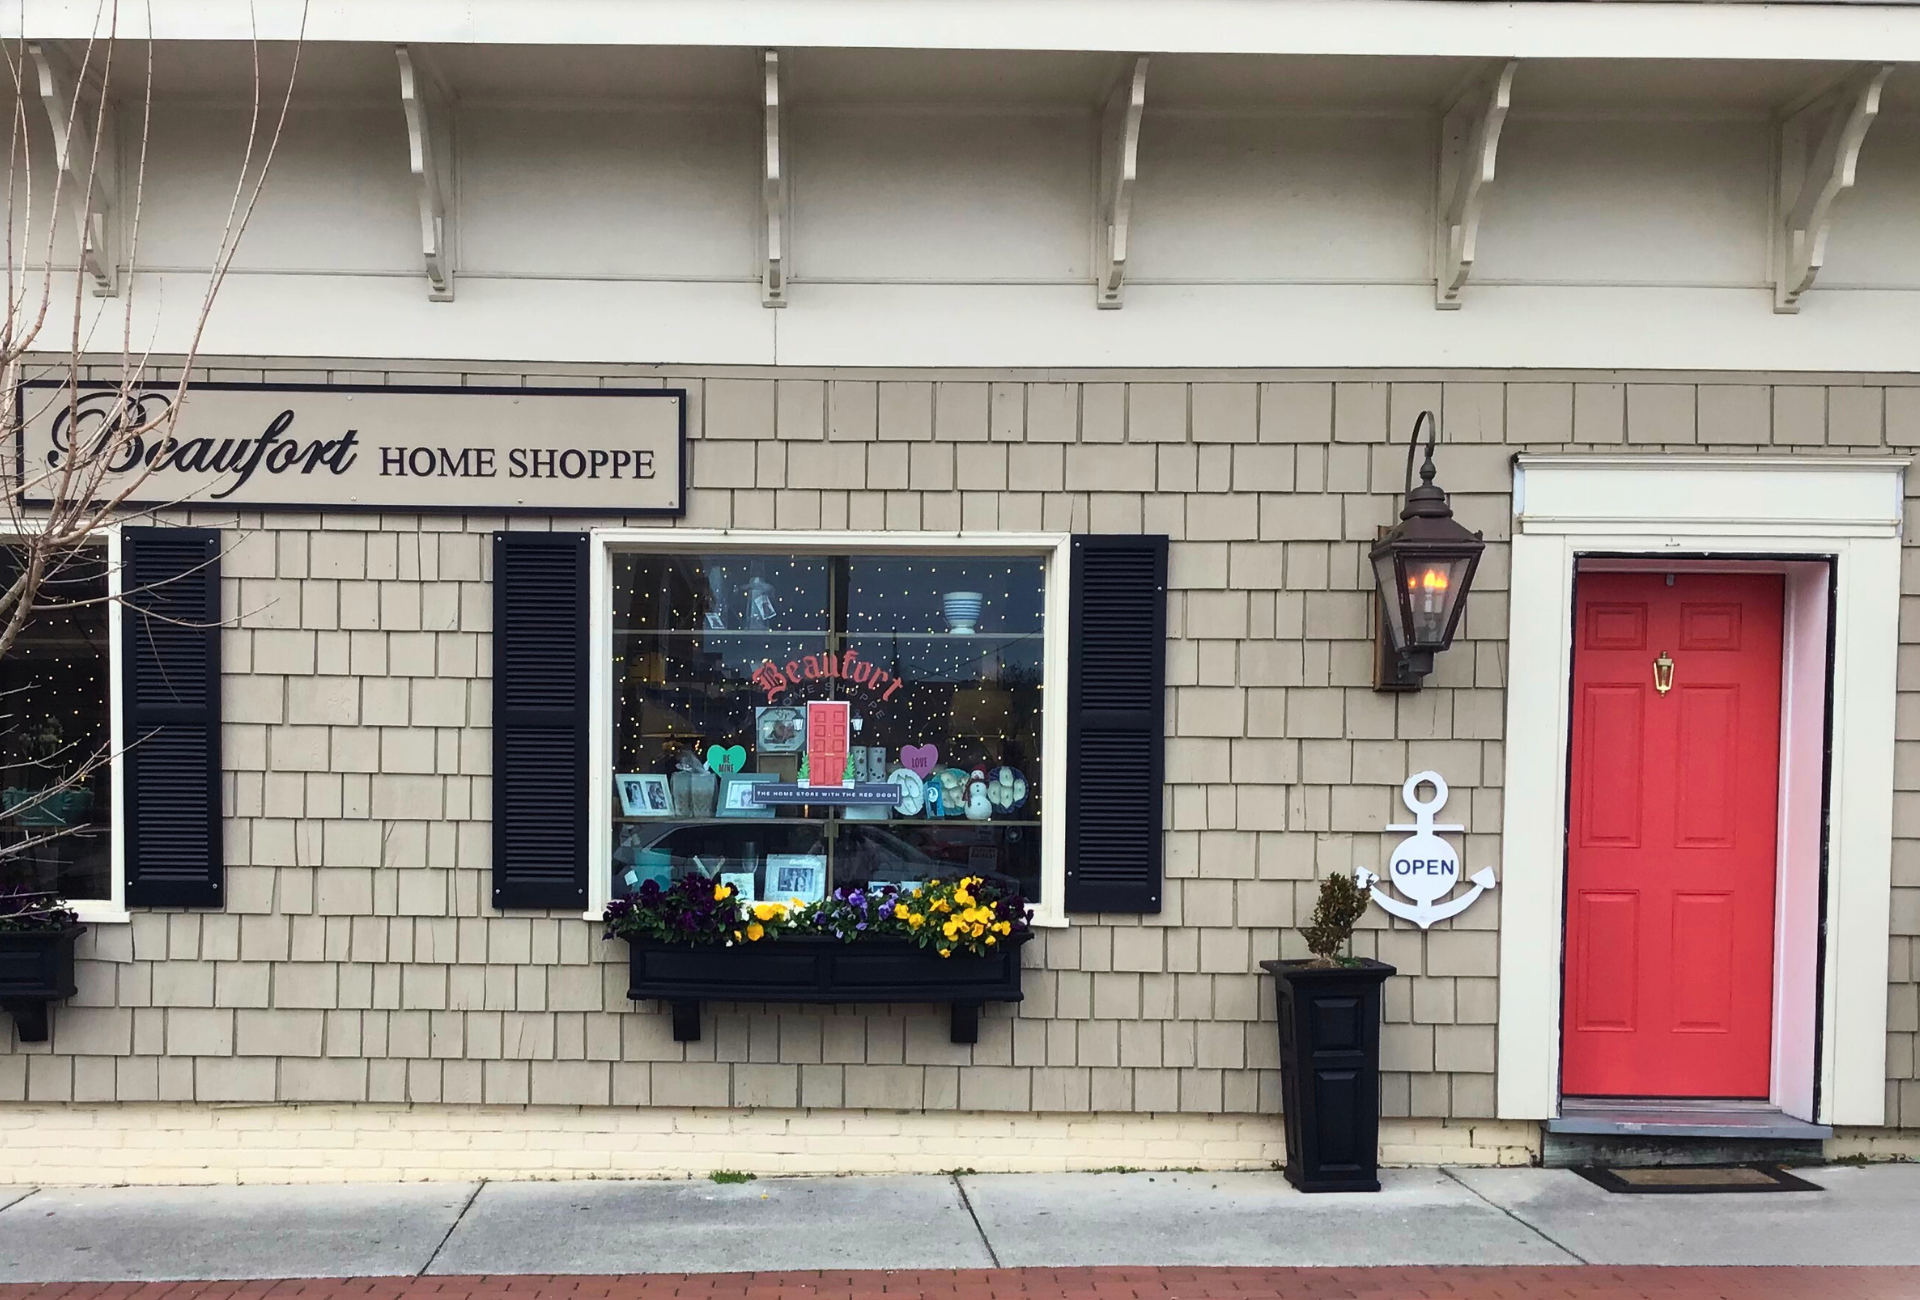 Beaufort Home Shoppe Store Front